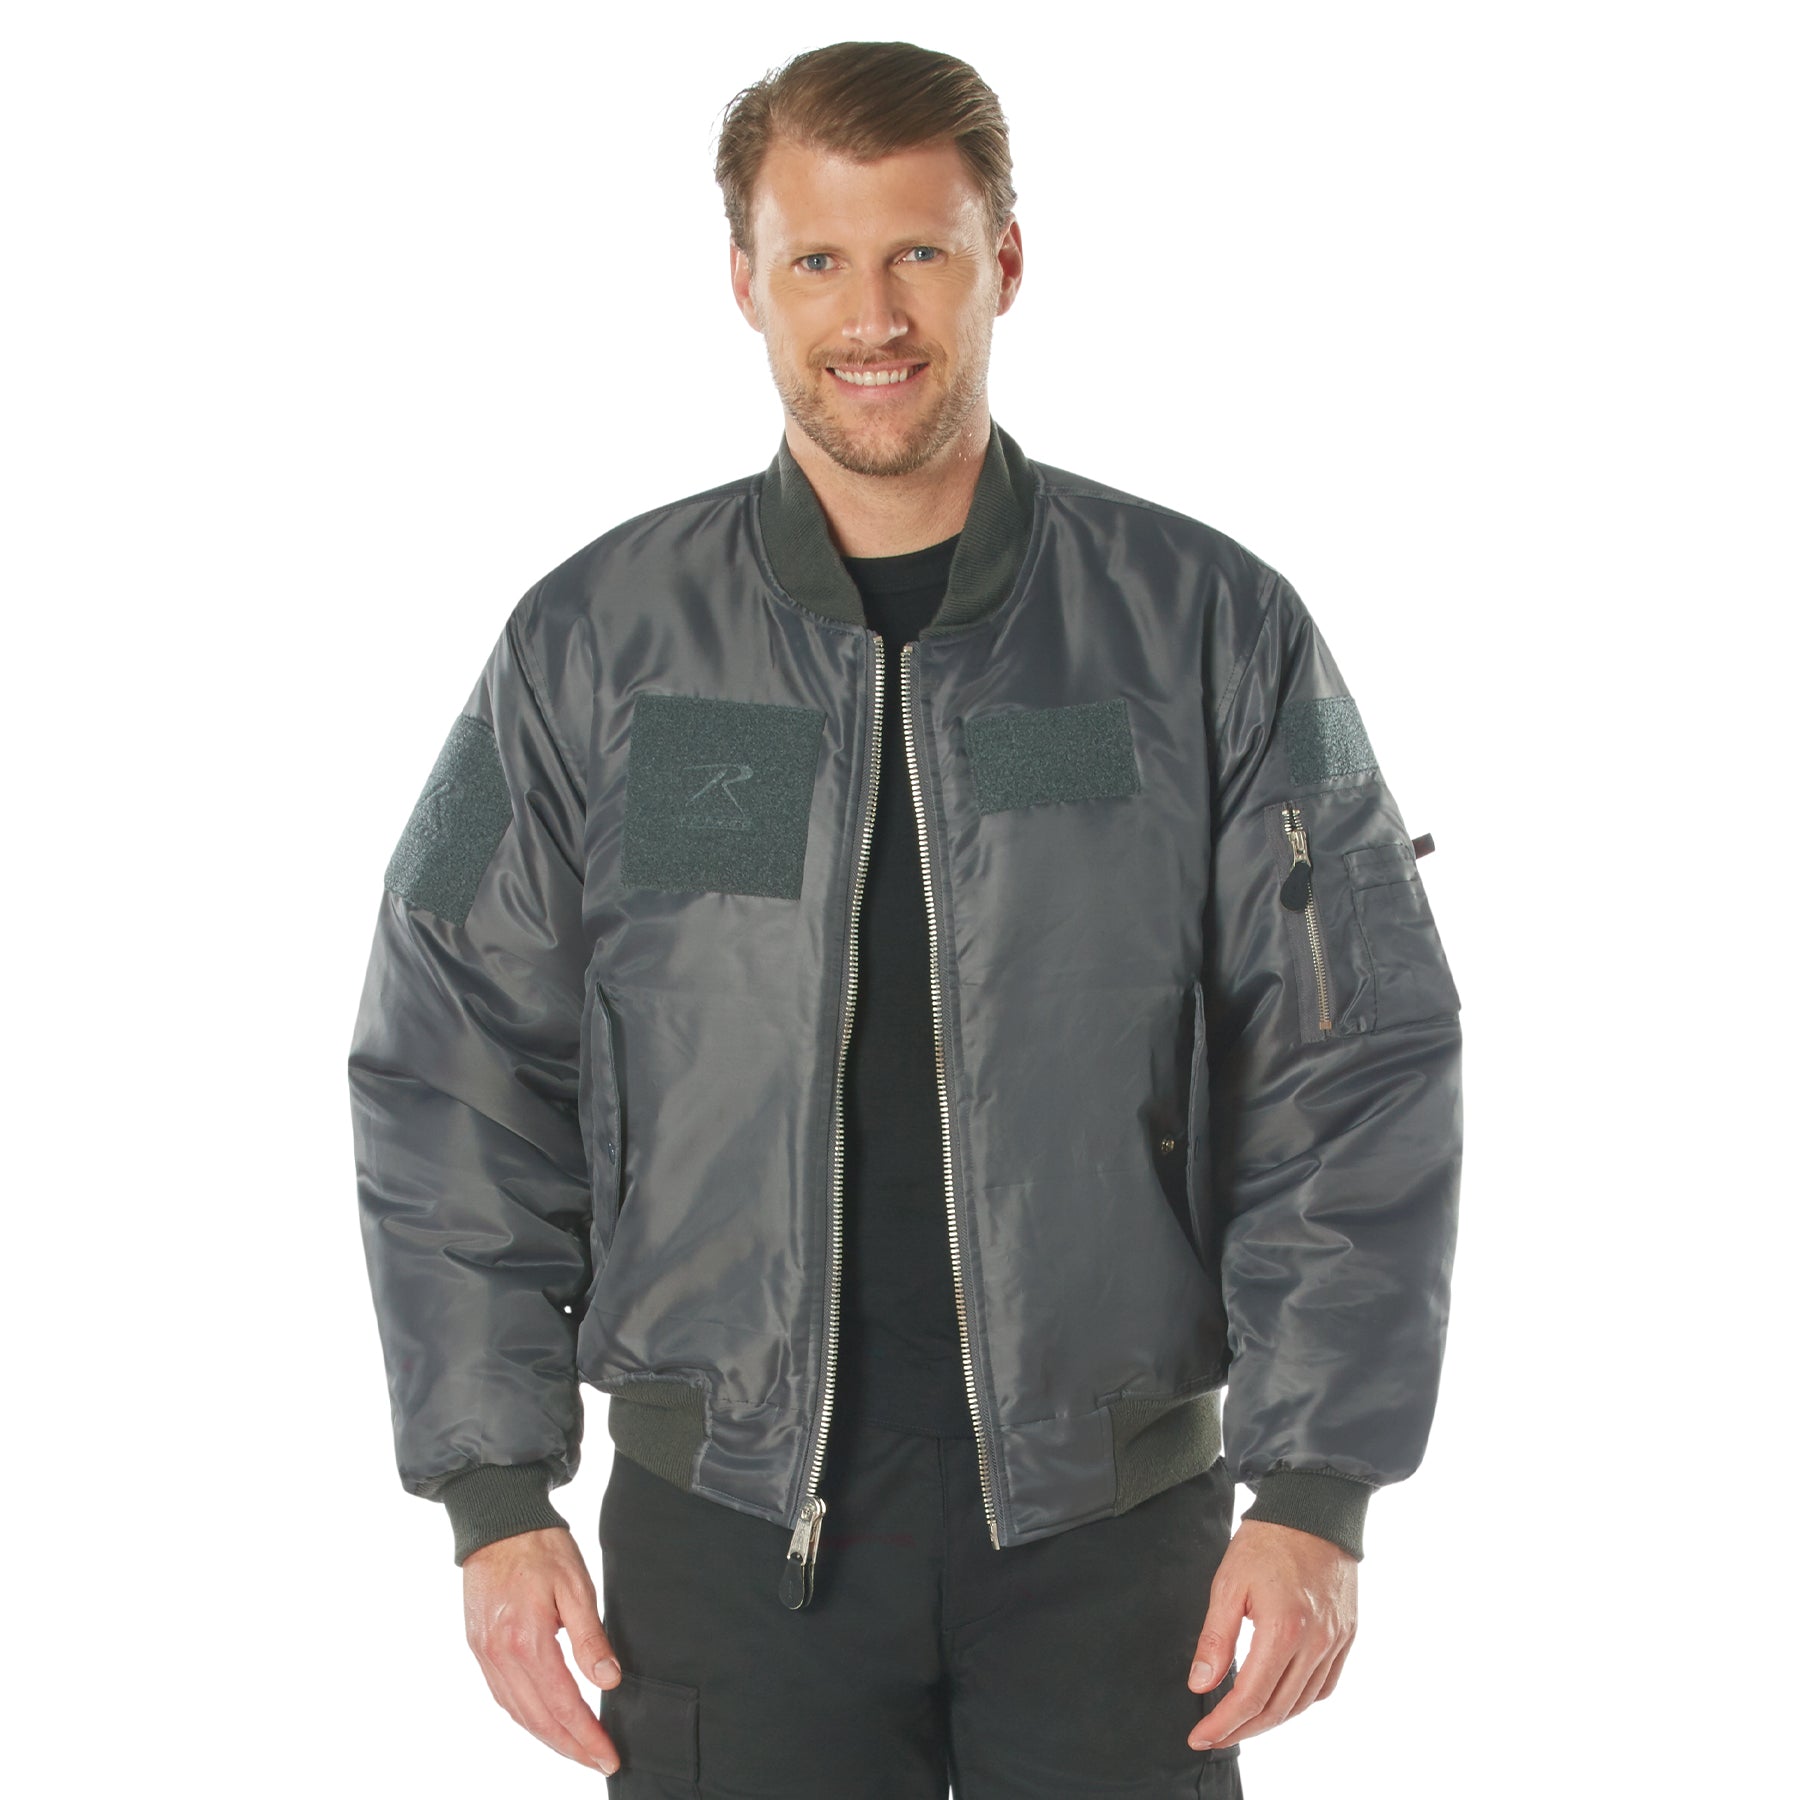 Nylon Adaptable MA-1 Flight Jackets with Patches Gun Metal Grey